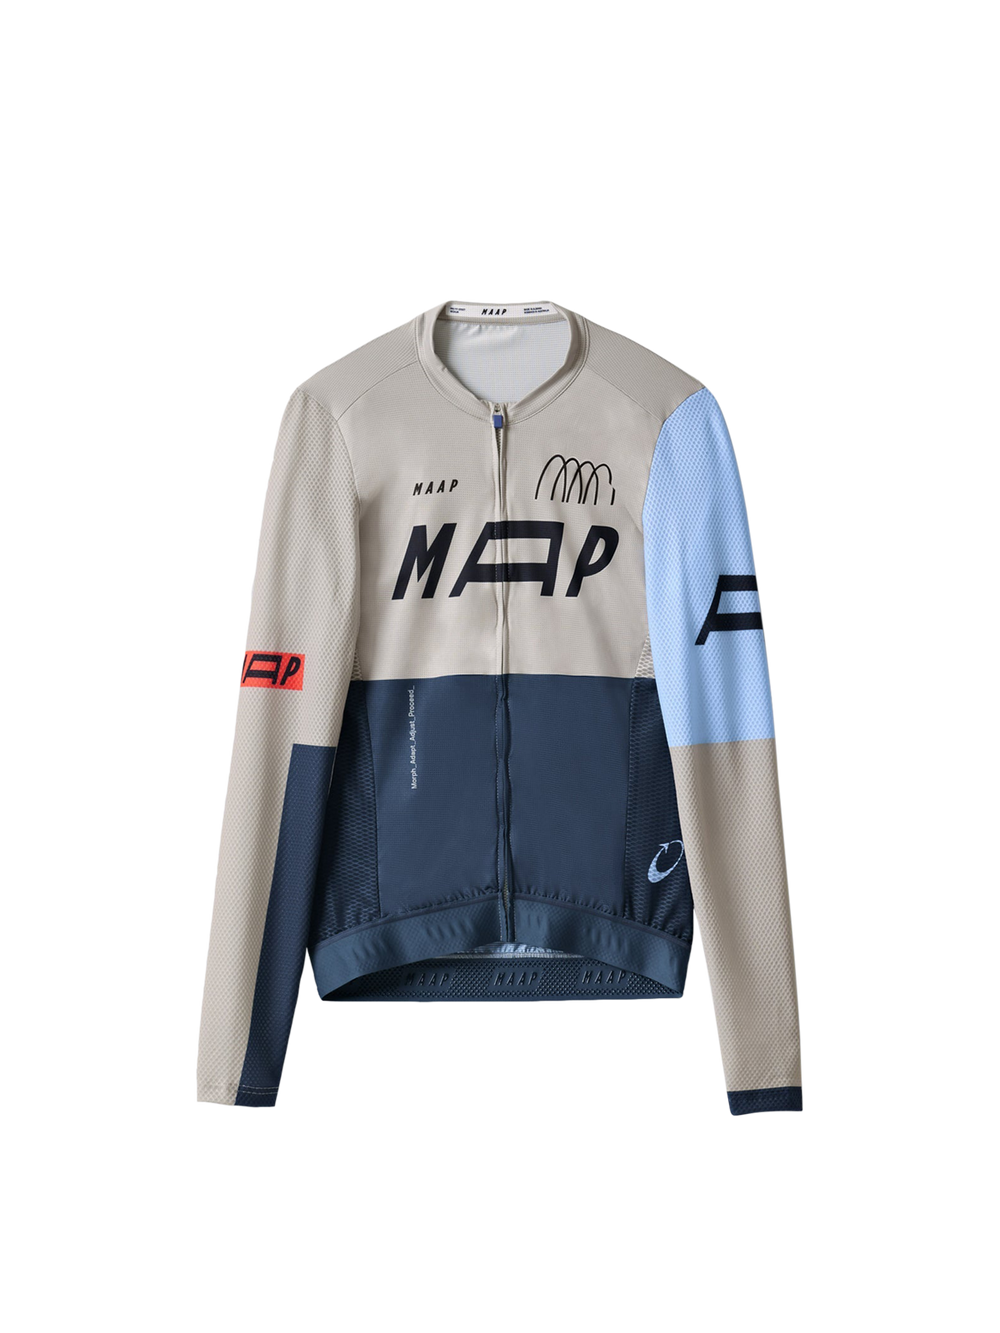 Product Image for Adapt Pro Air LS Jersey